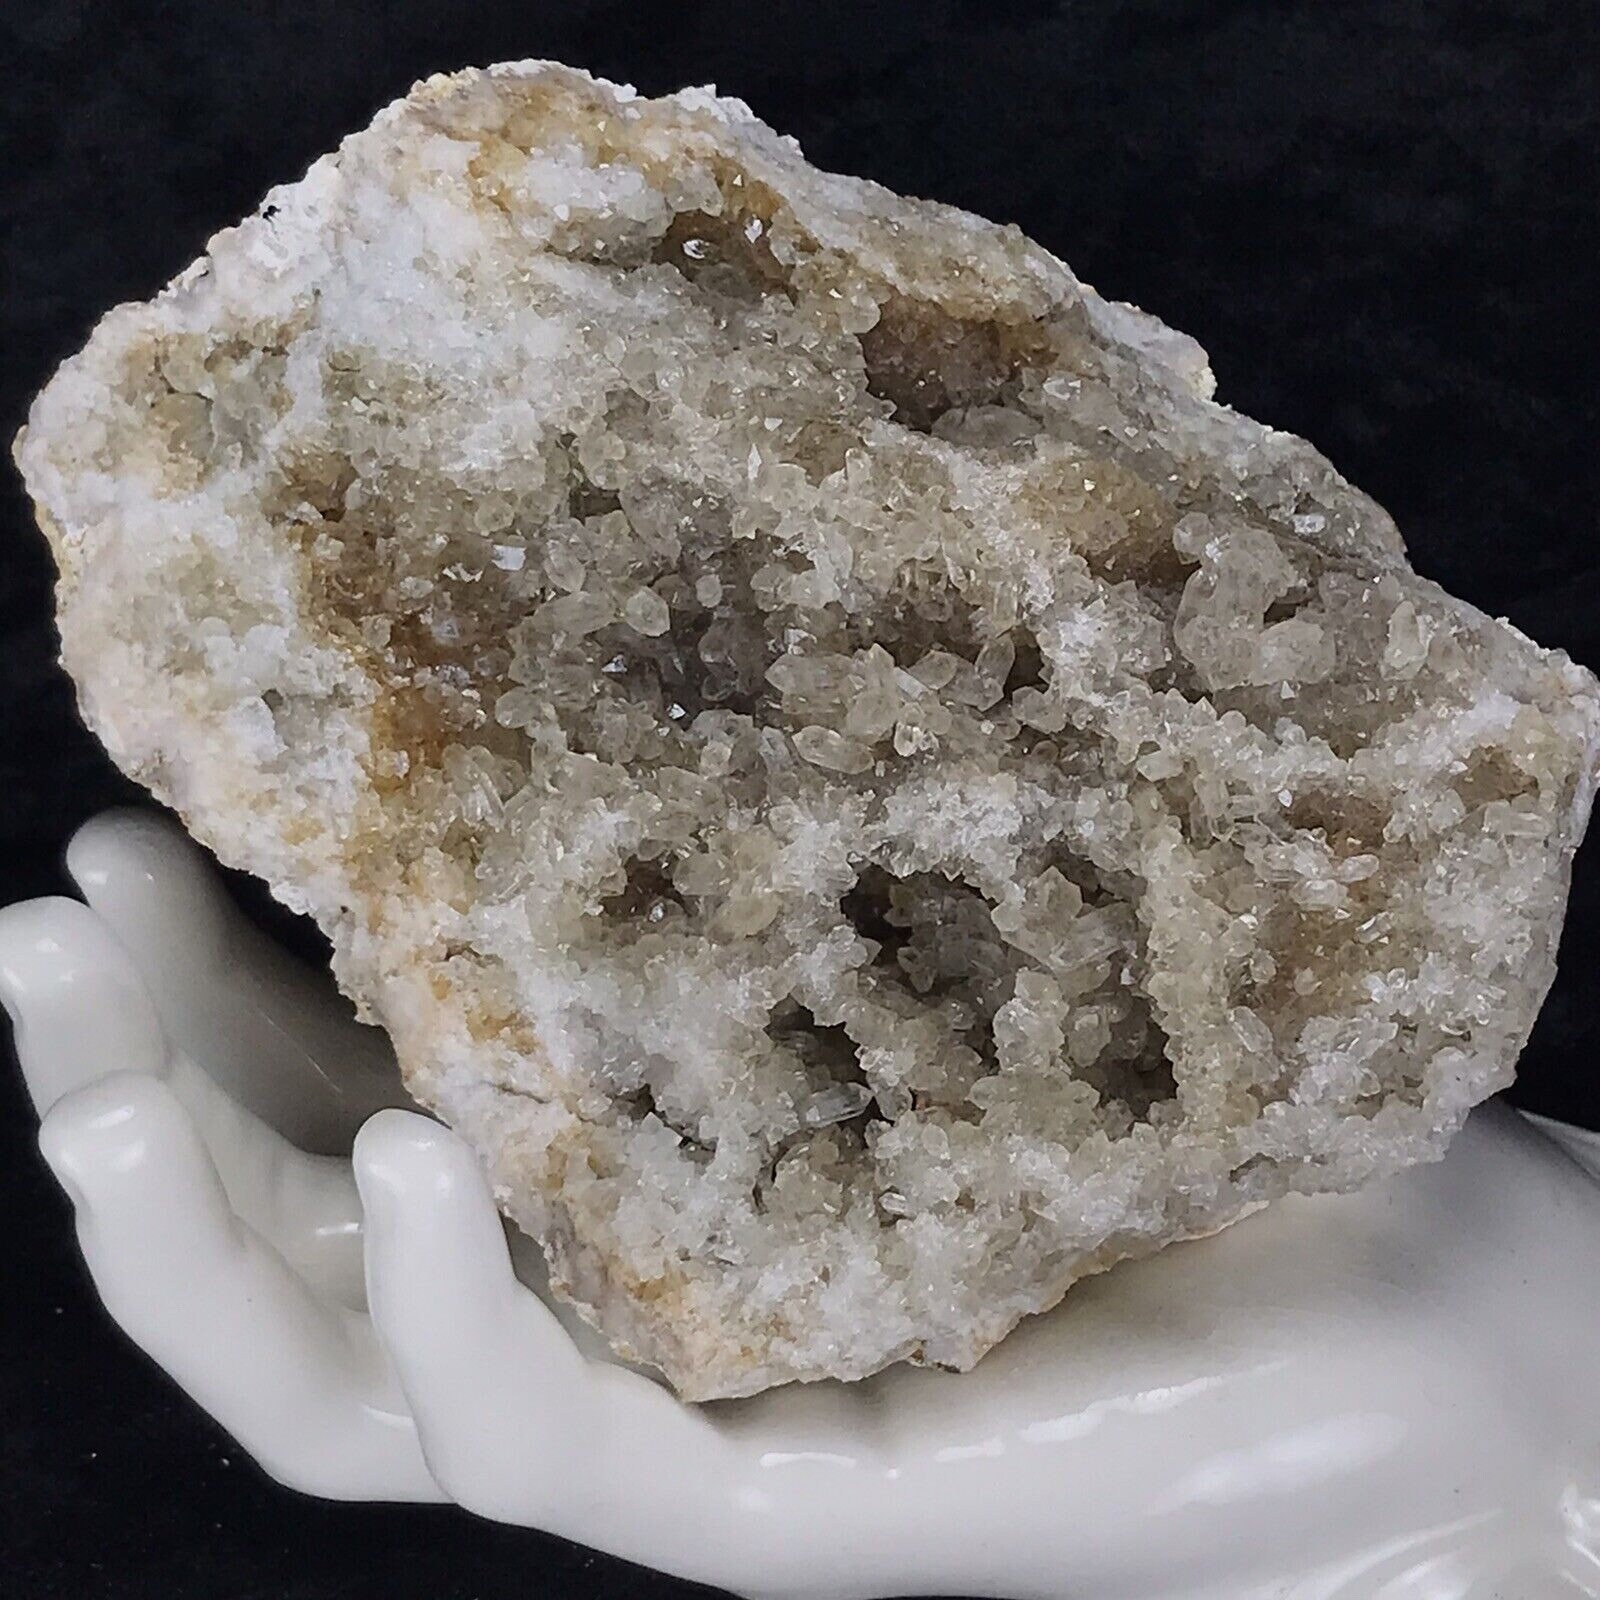 Testing out our - Lida Asteria Kentucky Geode Rock Shop